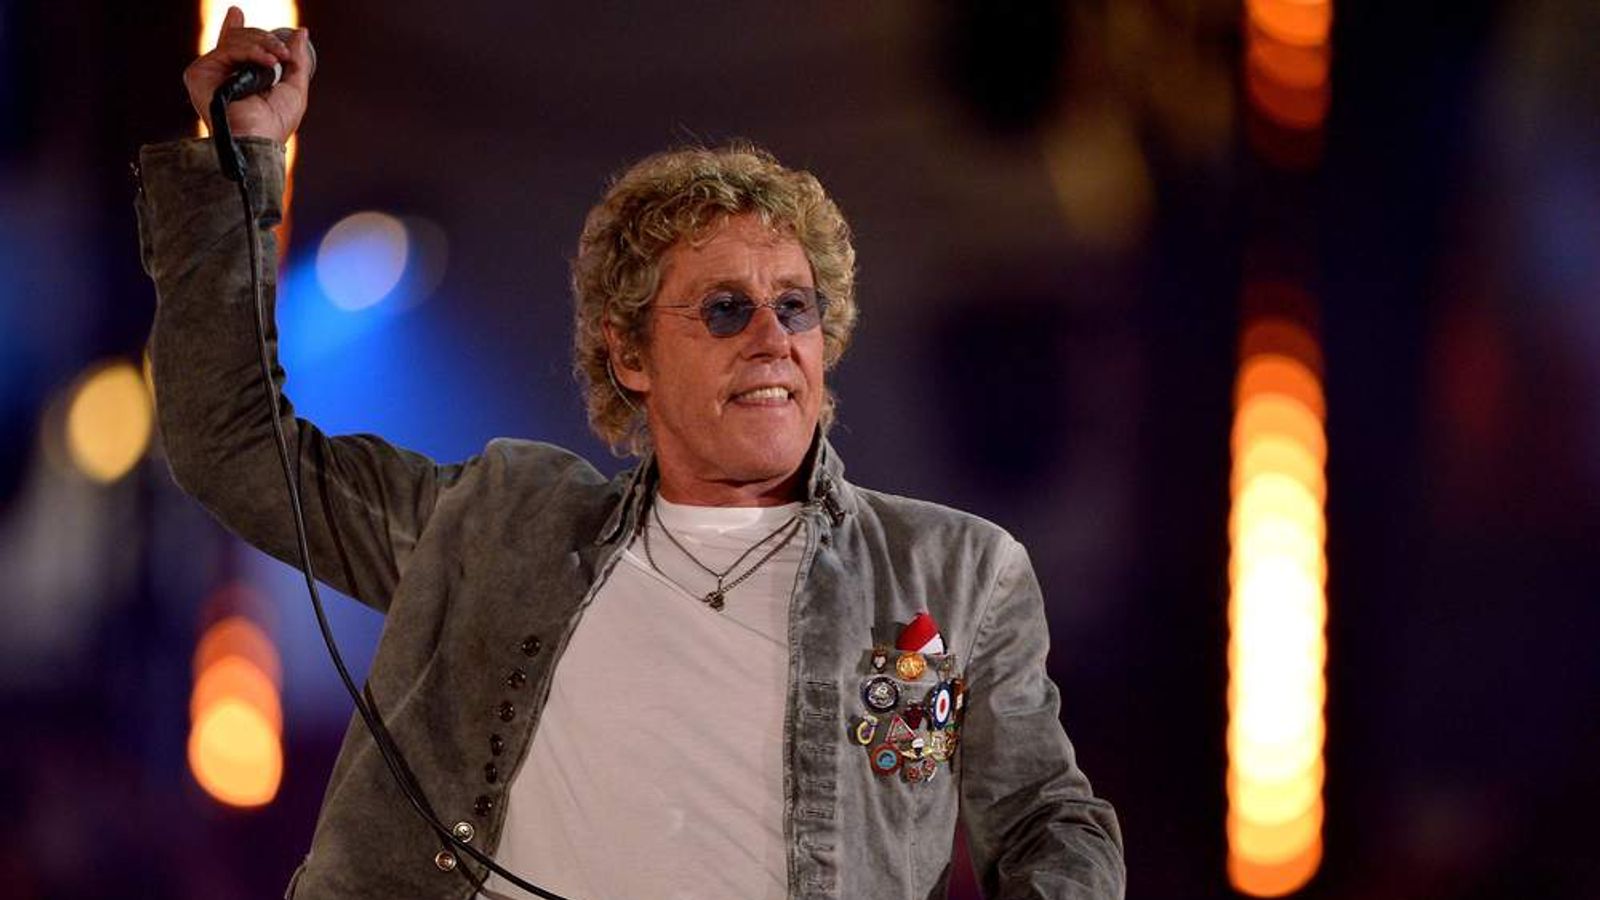 The Who at the 2012 Olympics Closing Ceremony